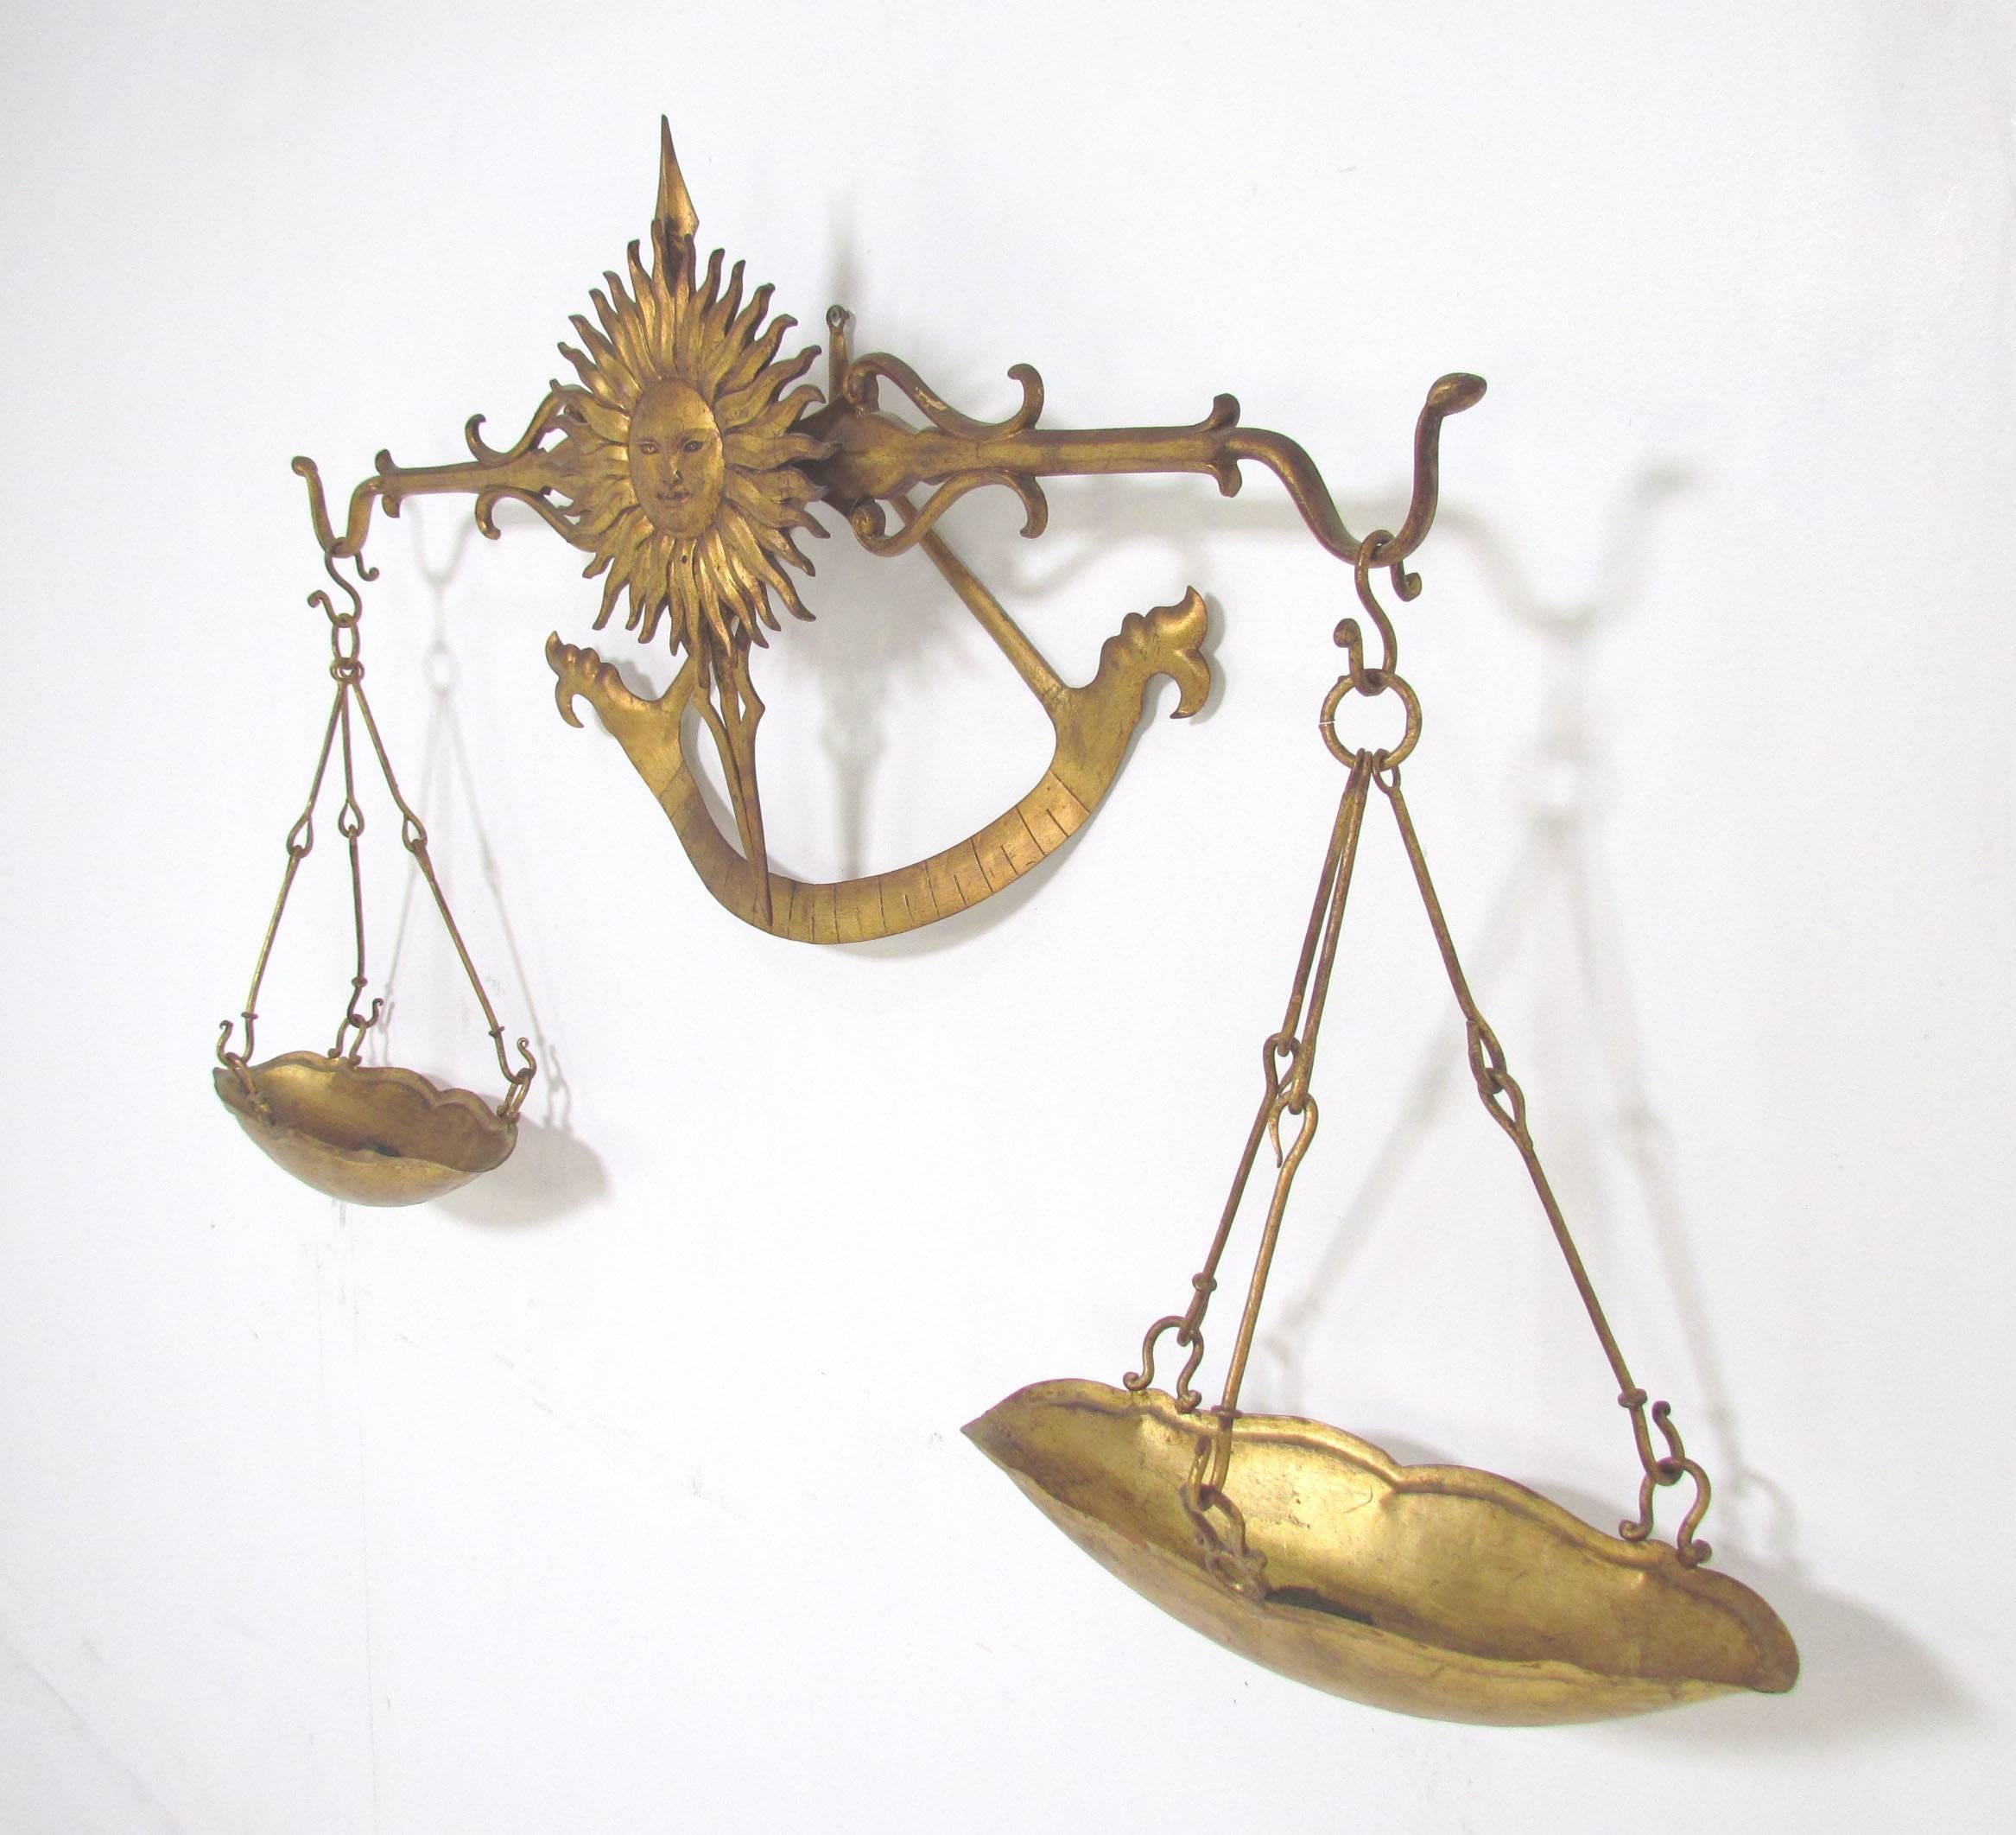 Unusual decorative gilt metal wall-mounted scale with sun motif by Palladio, Italy, better known for their mirrors. Previously used as a planter, the weighing pans could also serve as vessels for a variety of small items from colored glass to candy.